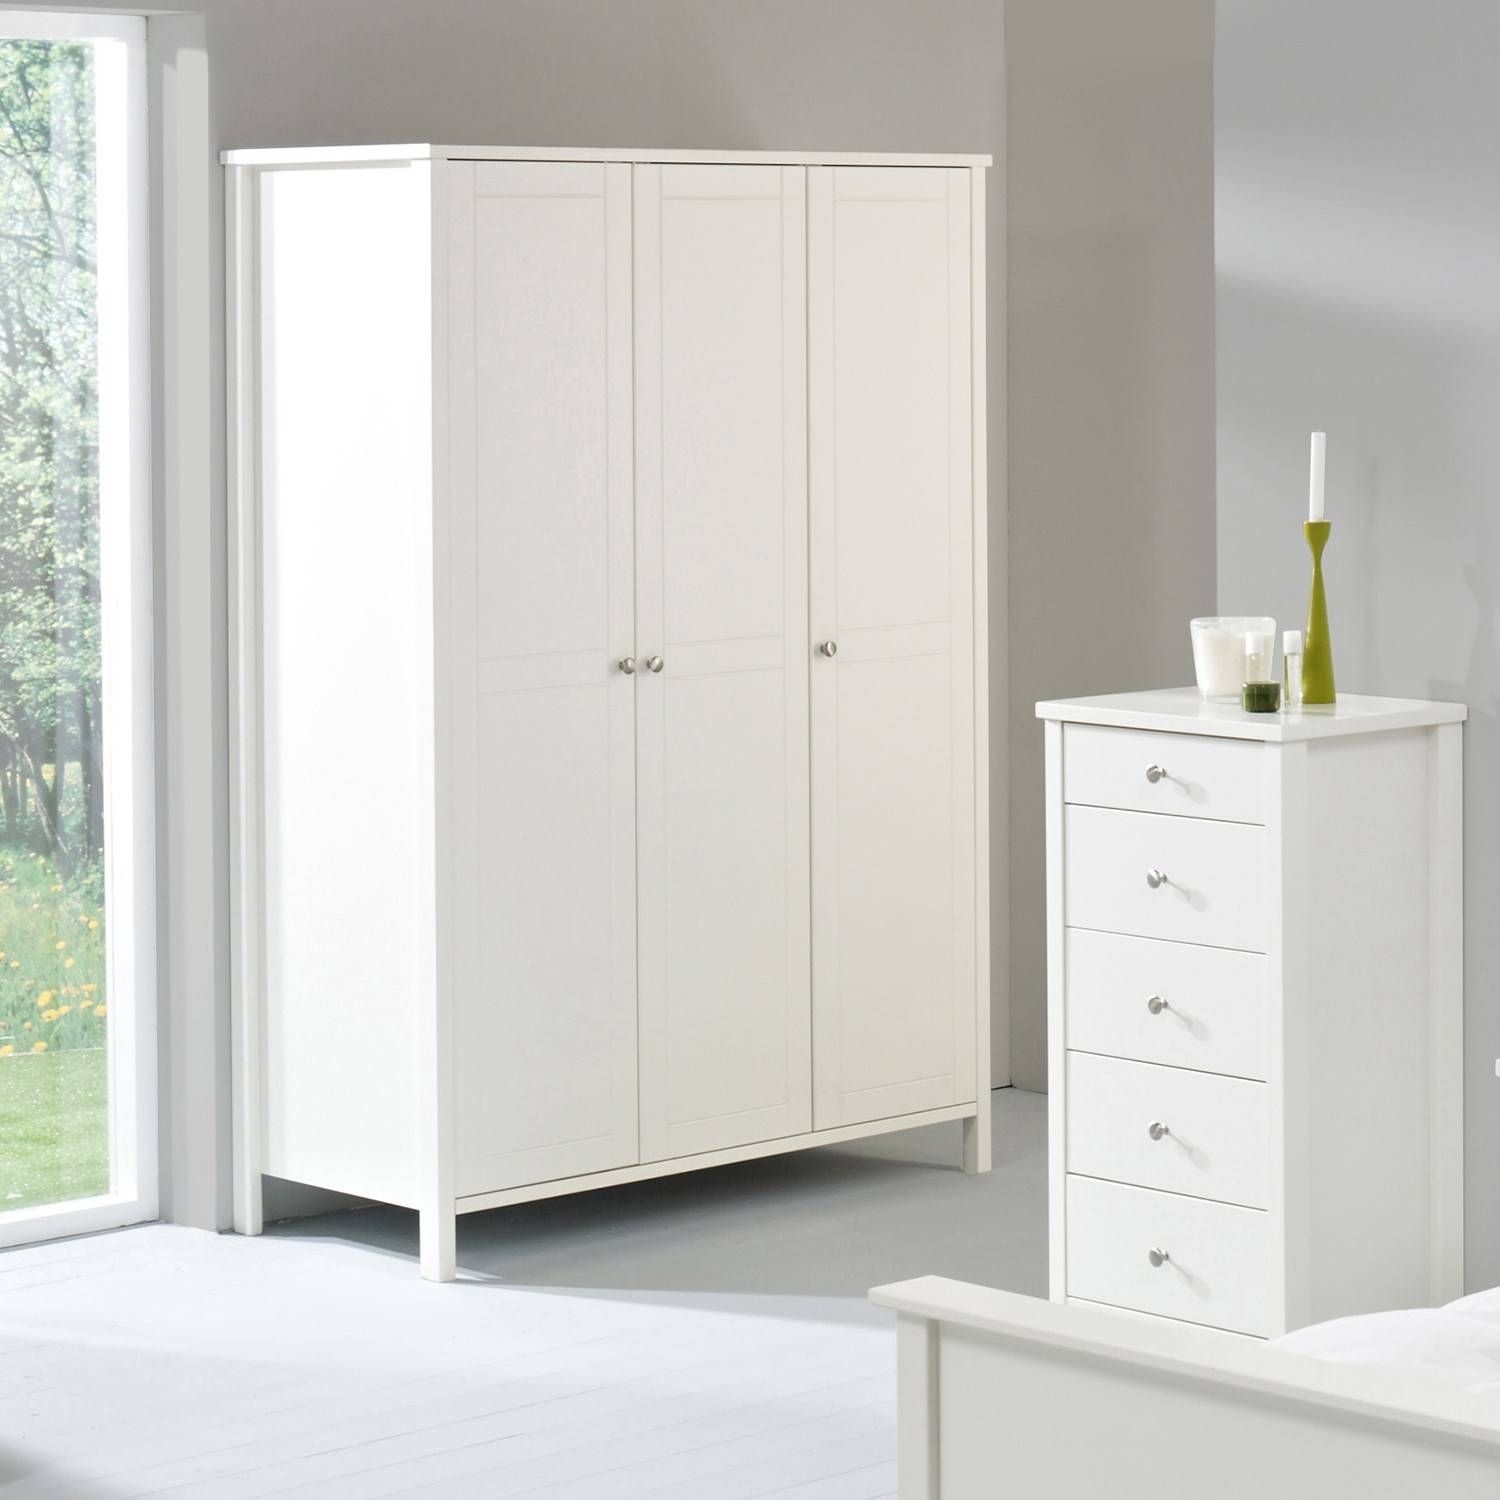 Stockholm White 3 Door Wardrobe | Bedroom Furniture Direct Throughout White Bedroom Wardrobes (View 11 of 15)